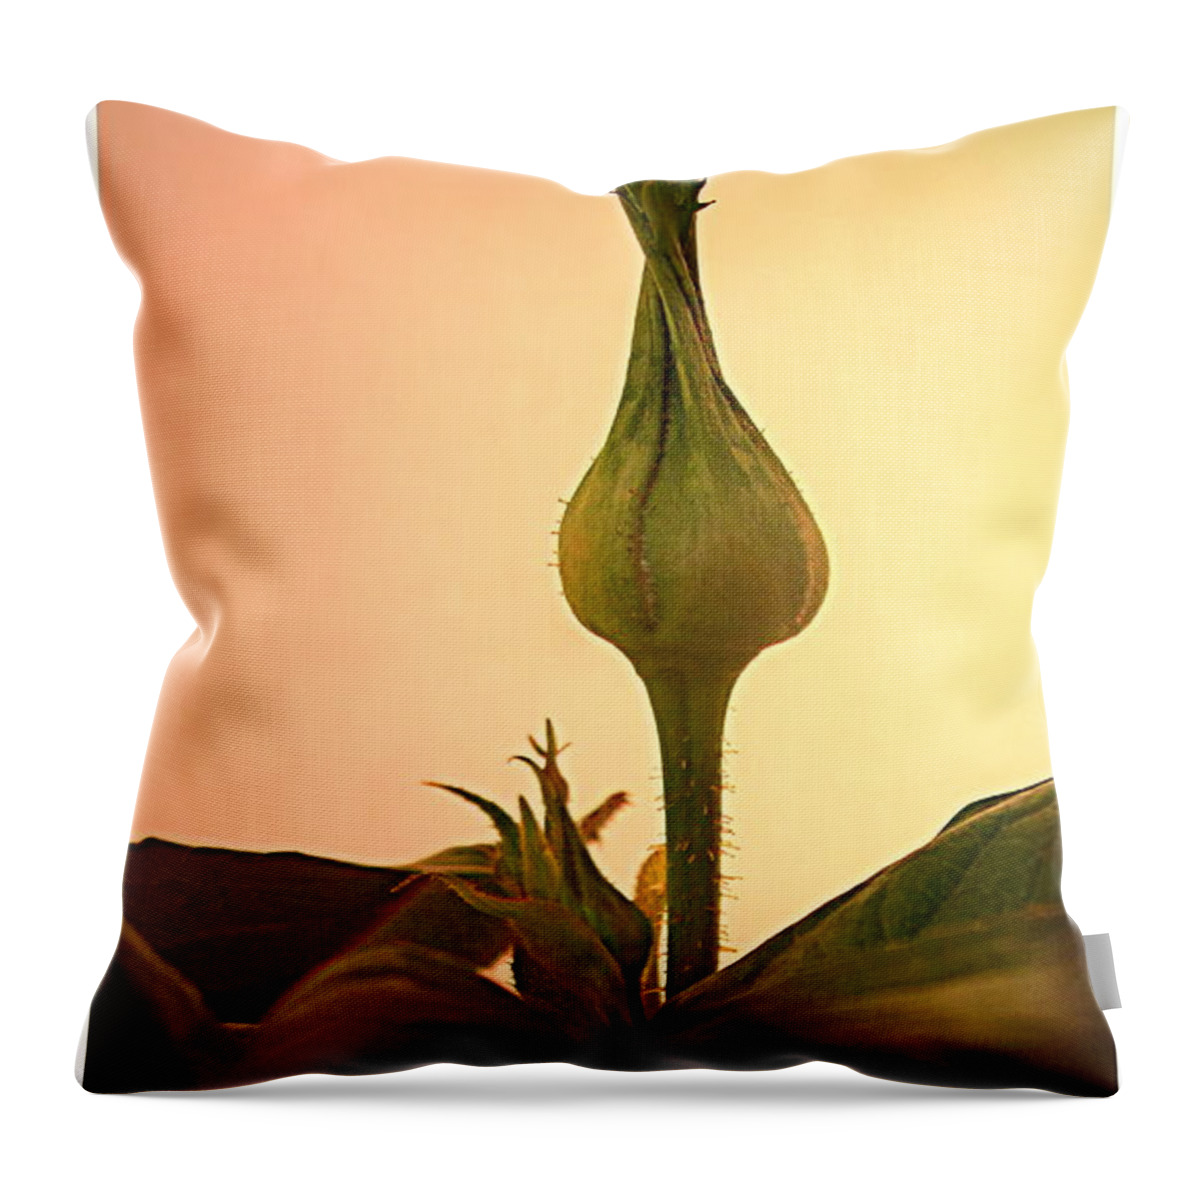 Rose Bud Throw Pillow featuring the photograph Embrace A Rose Bud Close Up by Joyce Dickens